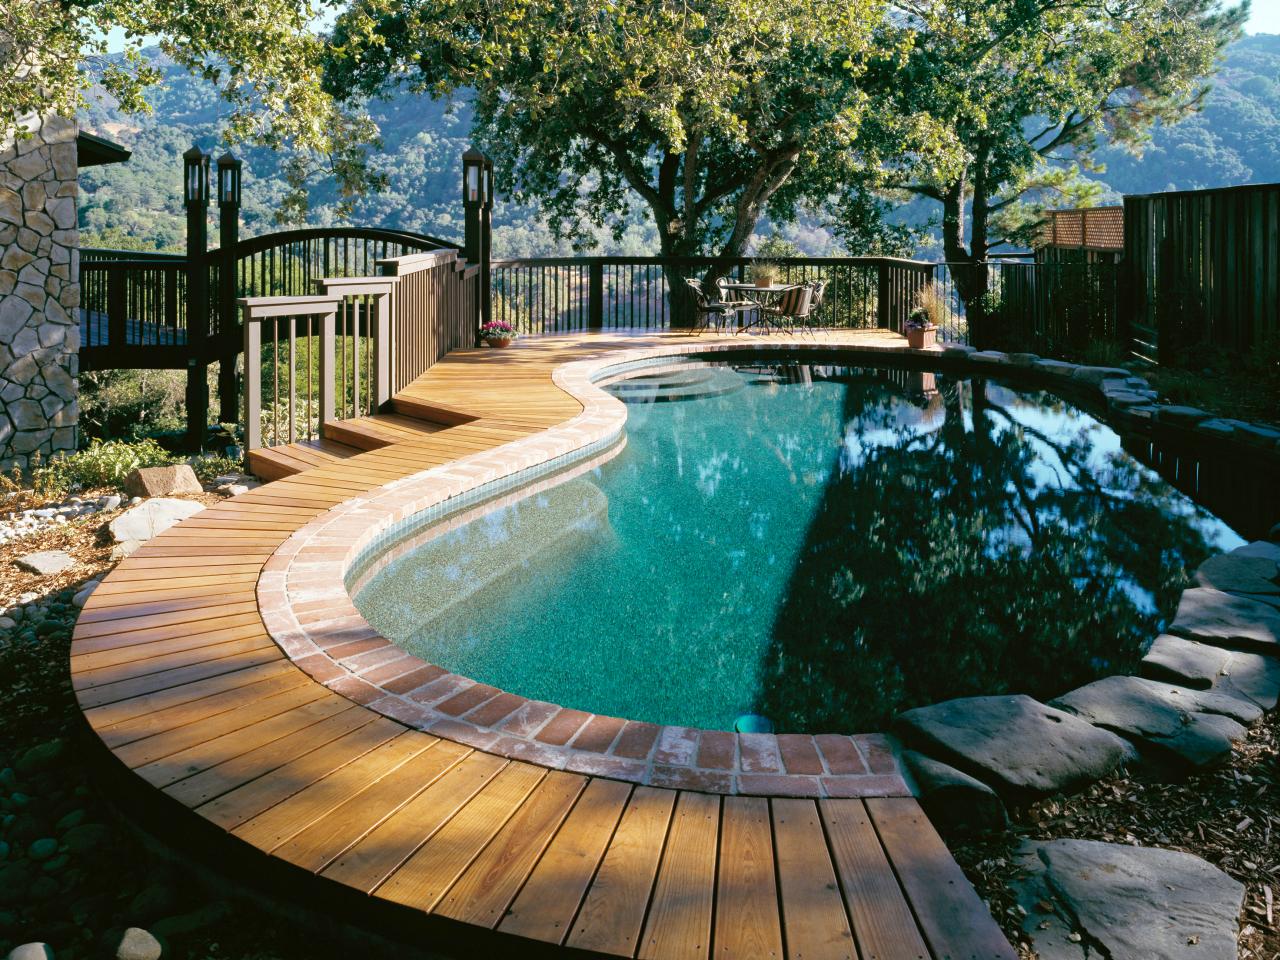 Pool Deck Designs And Options Diy, Above Ground Swimming Pool Deck Ideas